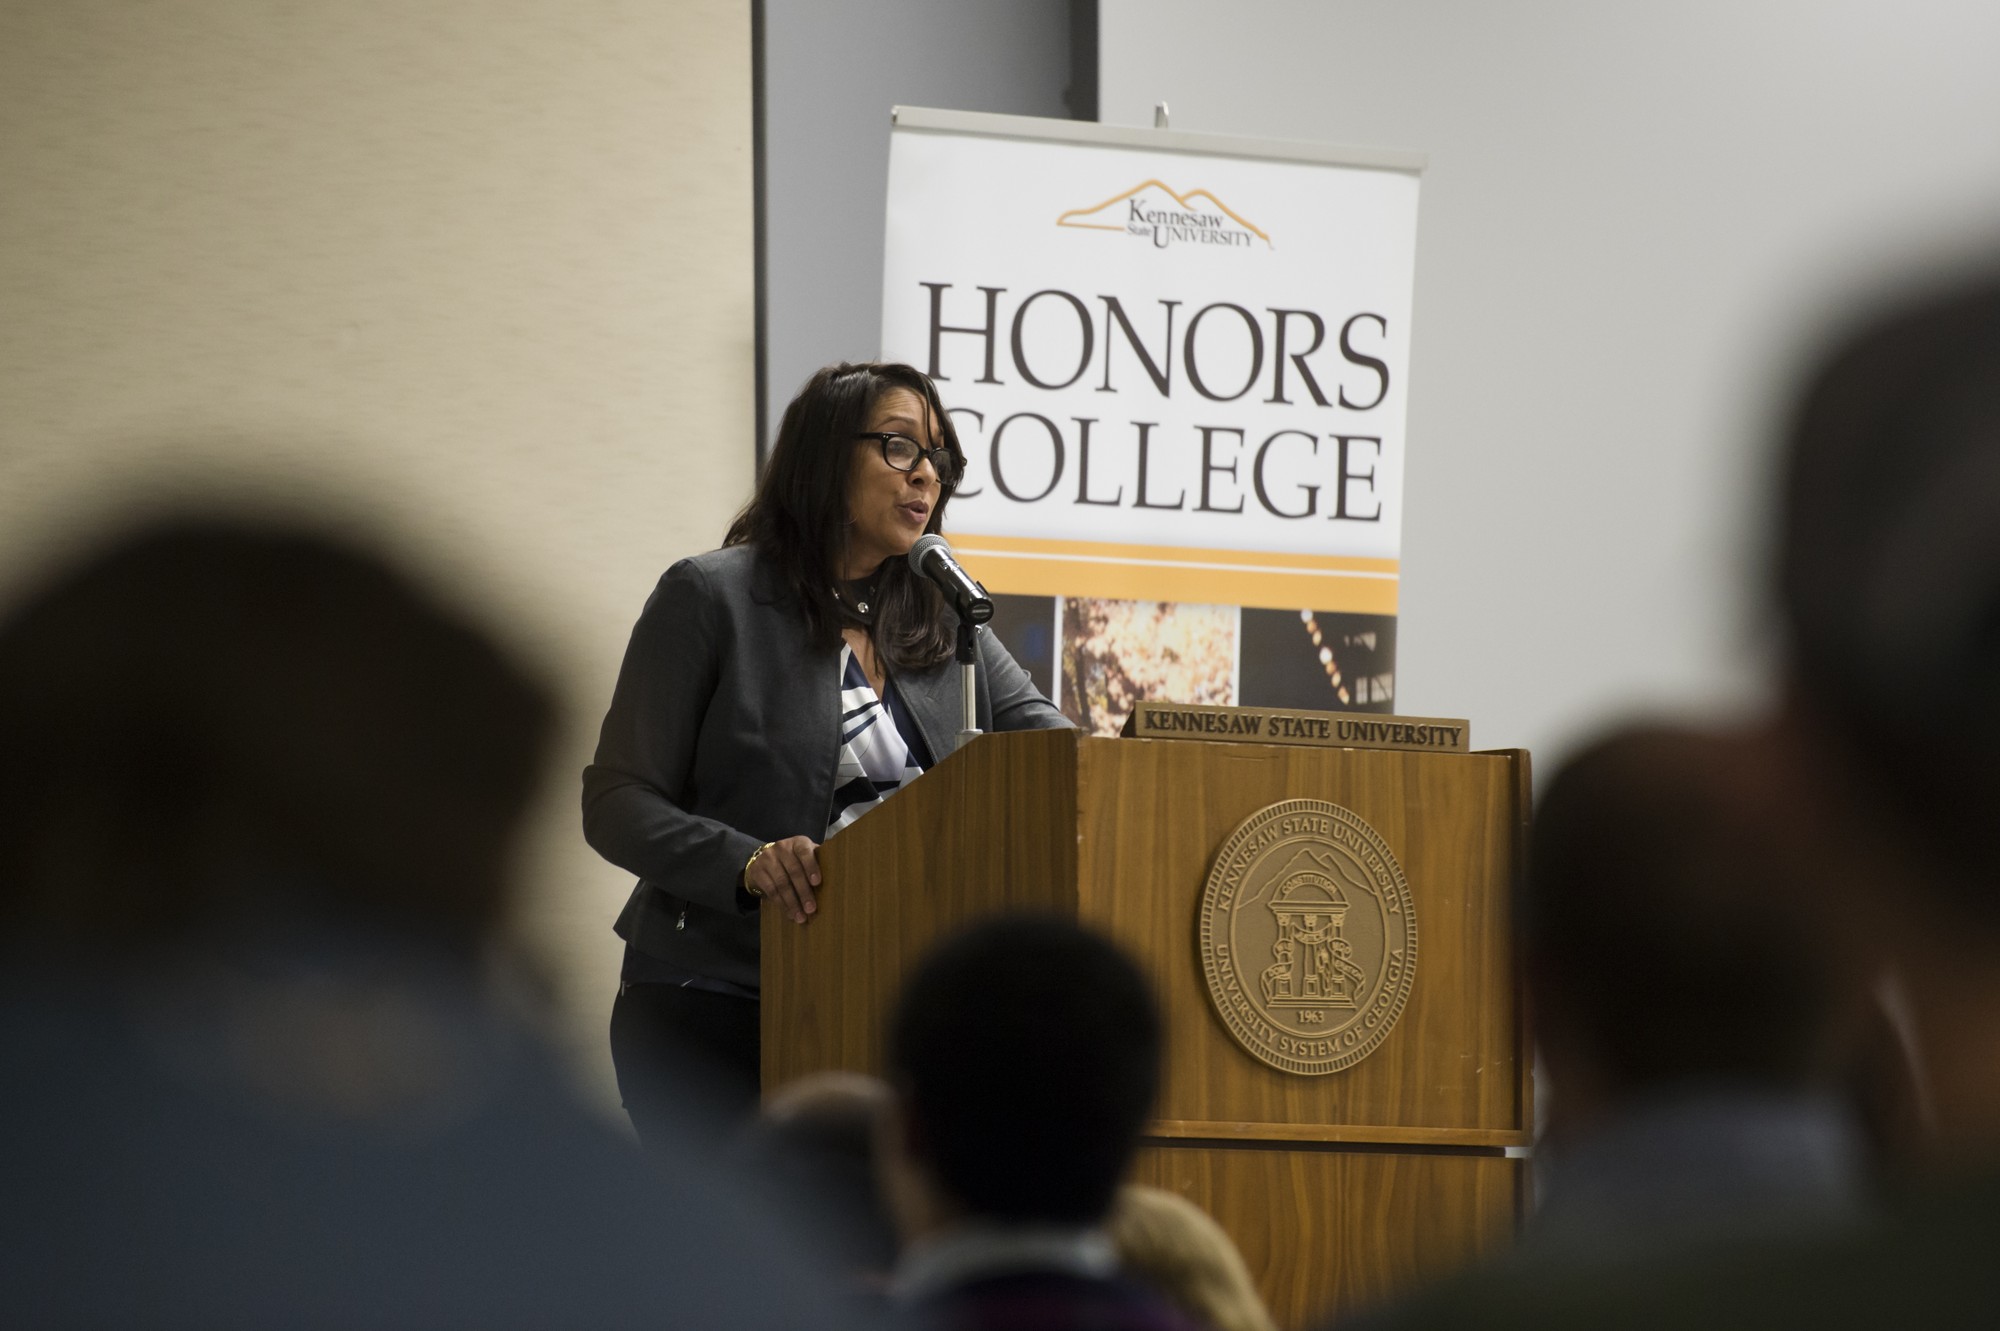 Pulitzer Prize winner visits for Honors College anniversary